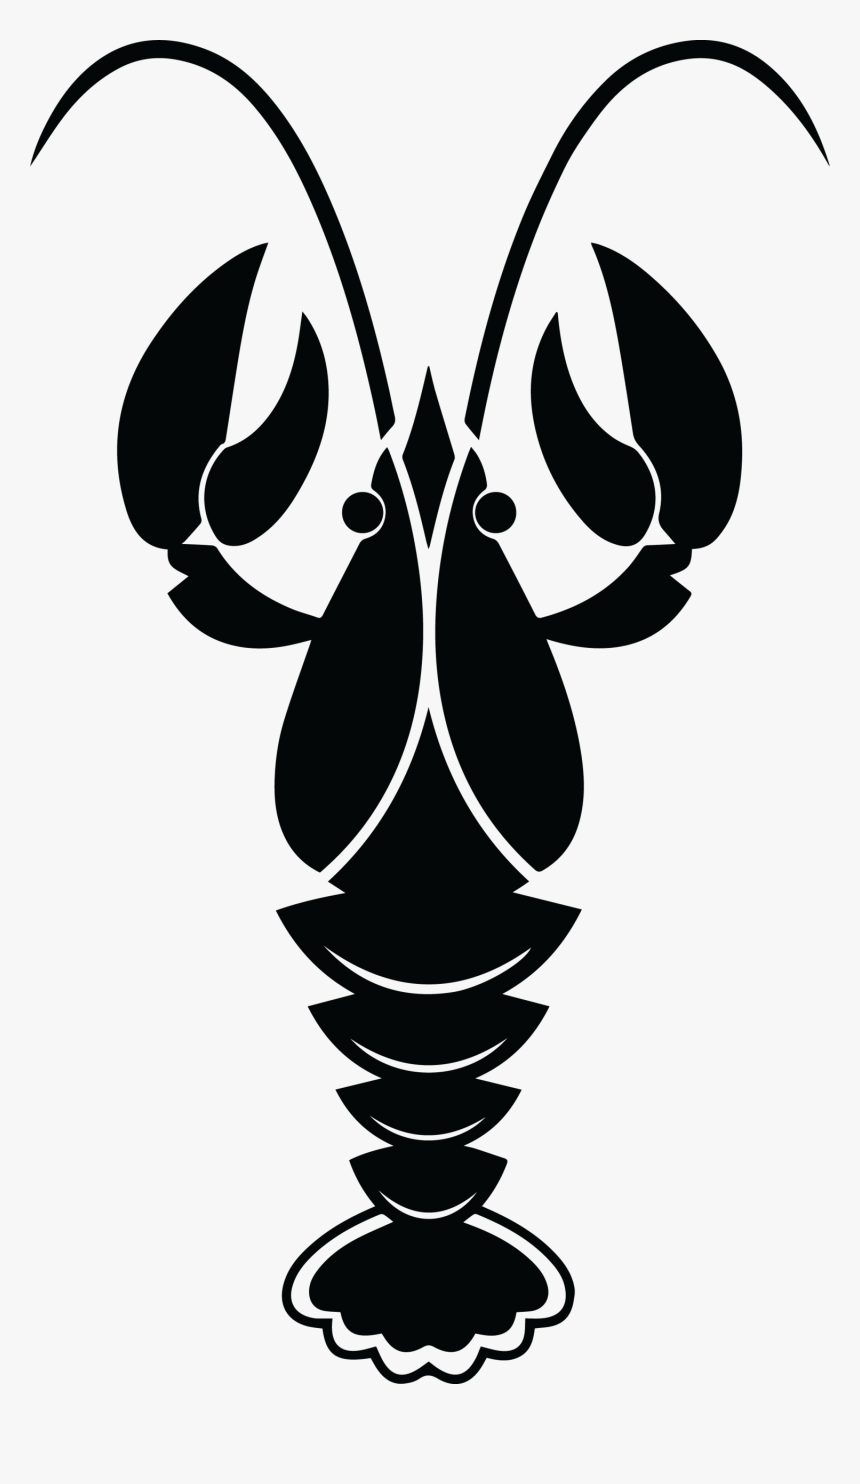 Crawfish Clipart Boiled Crawfish - Crawfish Clipart Black And White, HD Png Download, Free Download